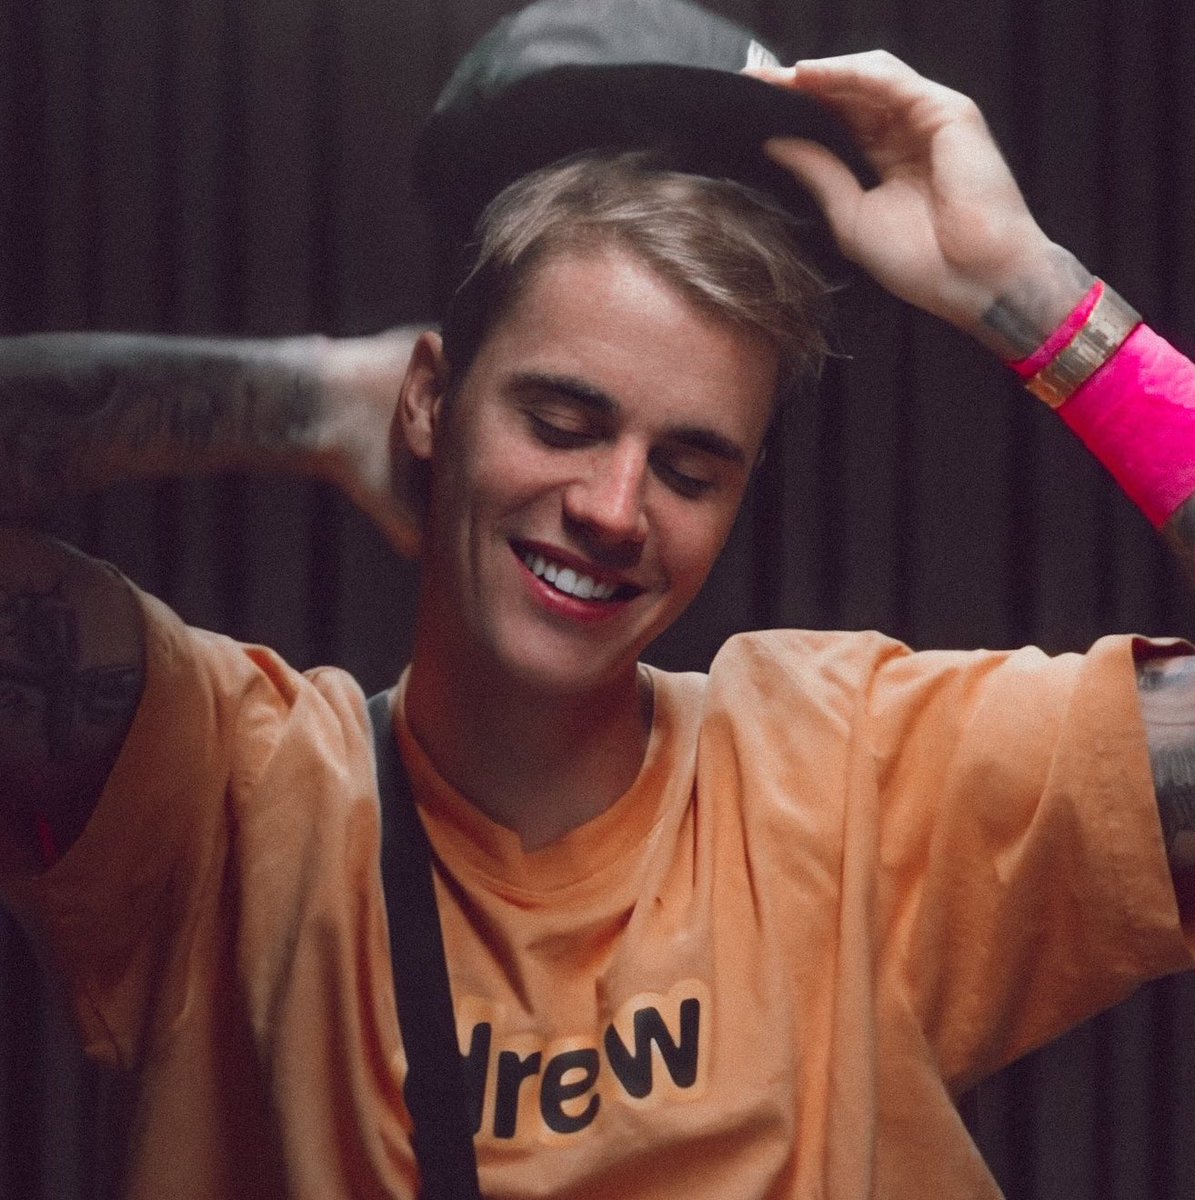 Justin Bieber is NOT the villain the everyone is trying to portray him as, a deserved thread: